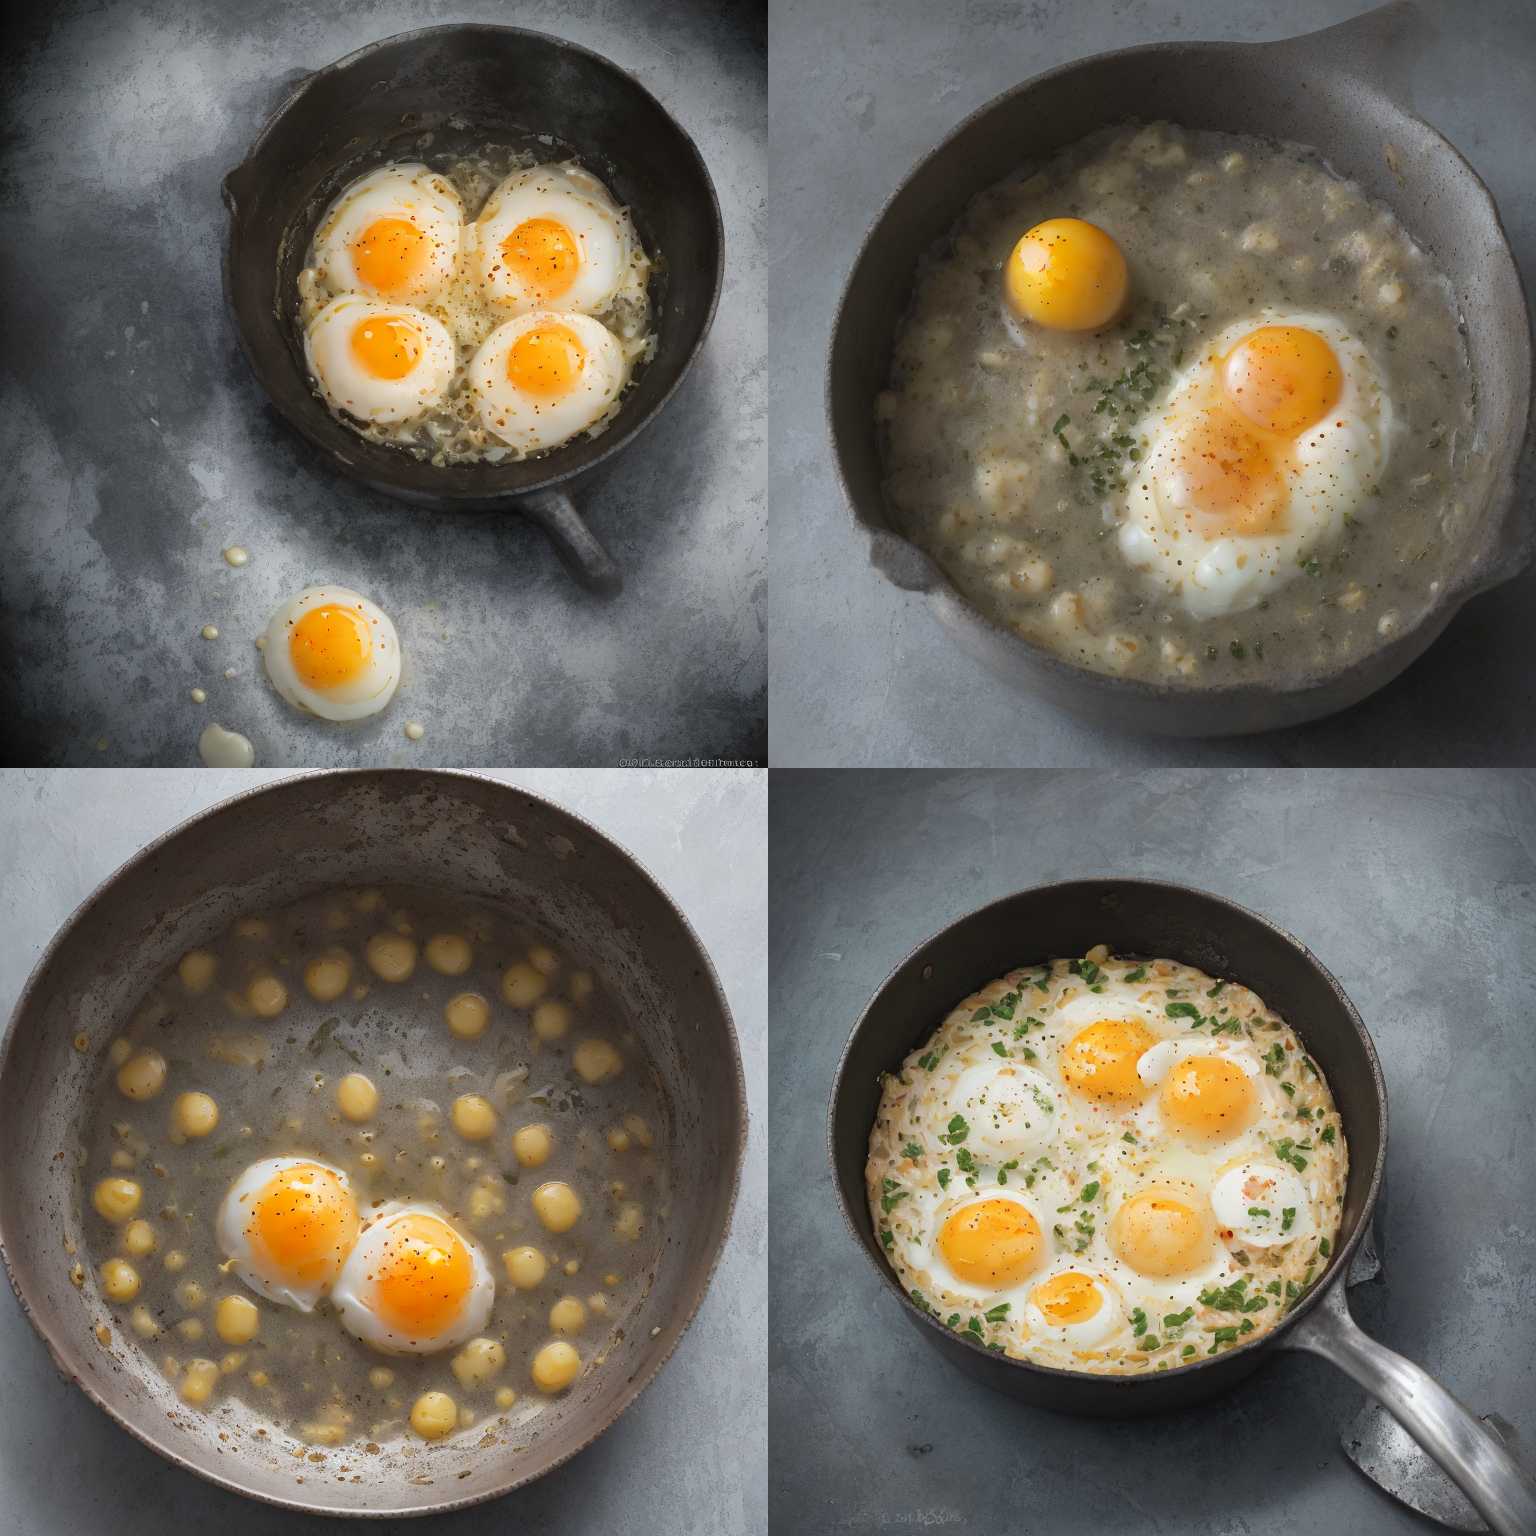 A cracked egg in a cold pan